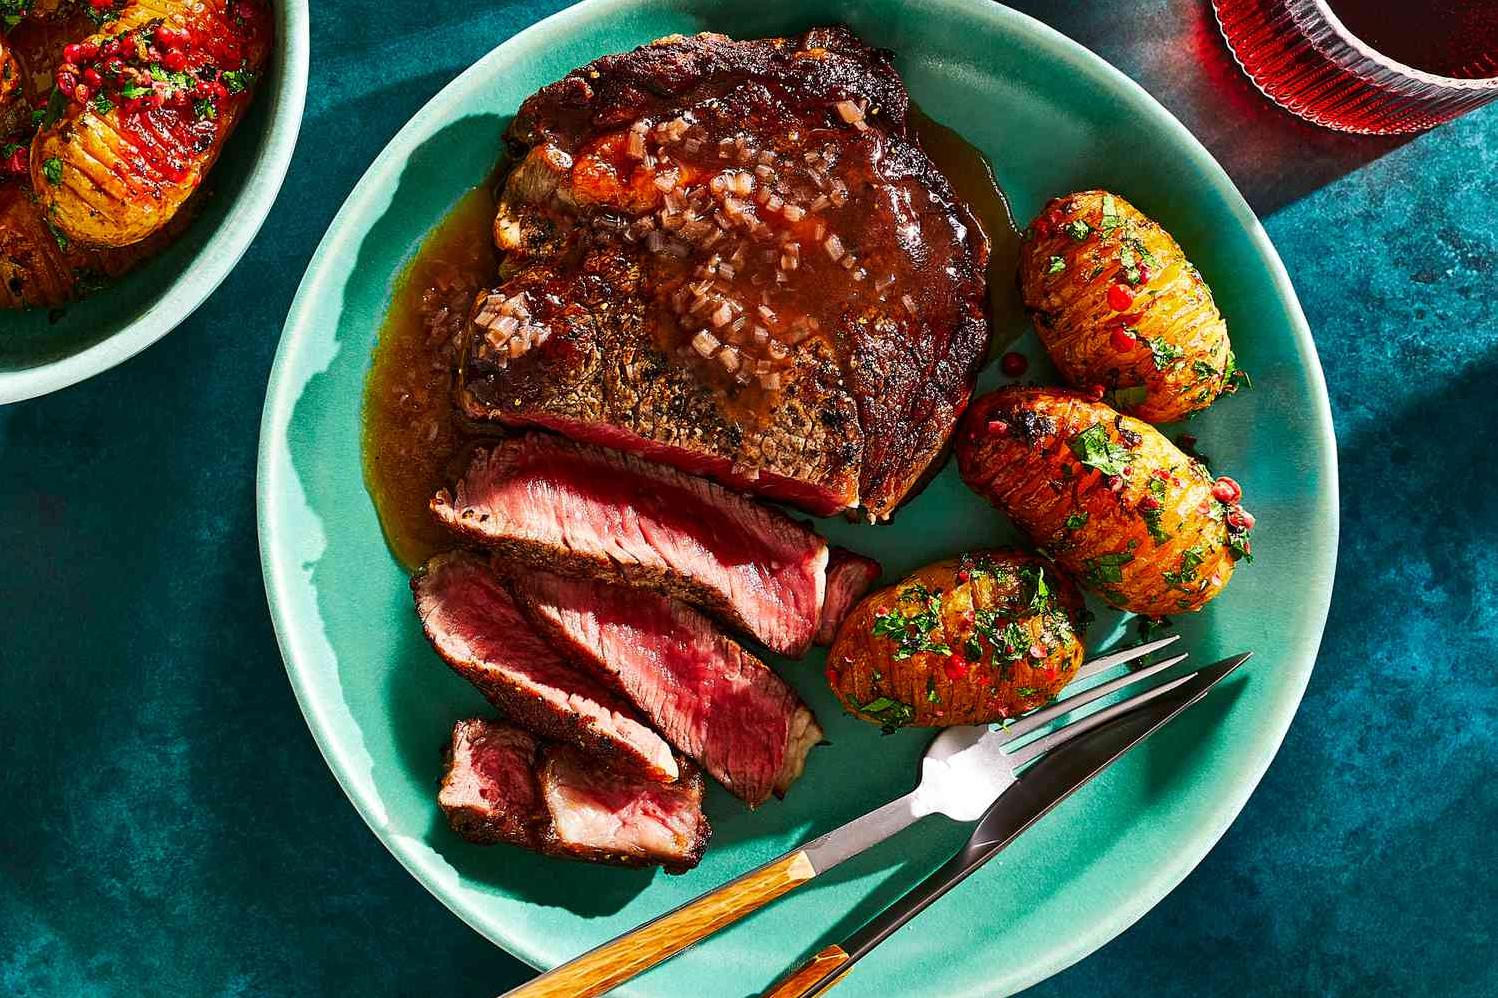  Perfectly seared, juicy steaks glazed in a mouthwatering red wine sauce.